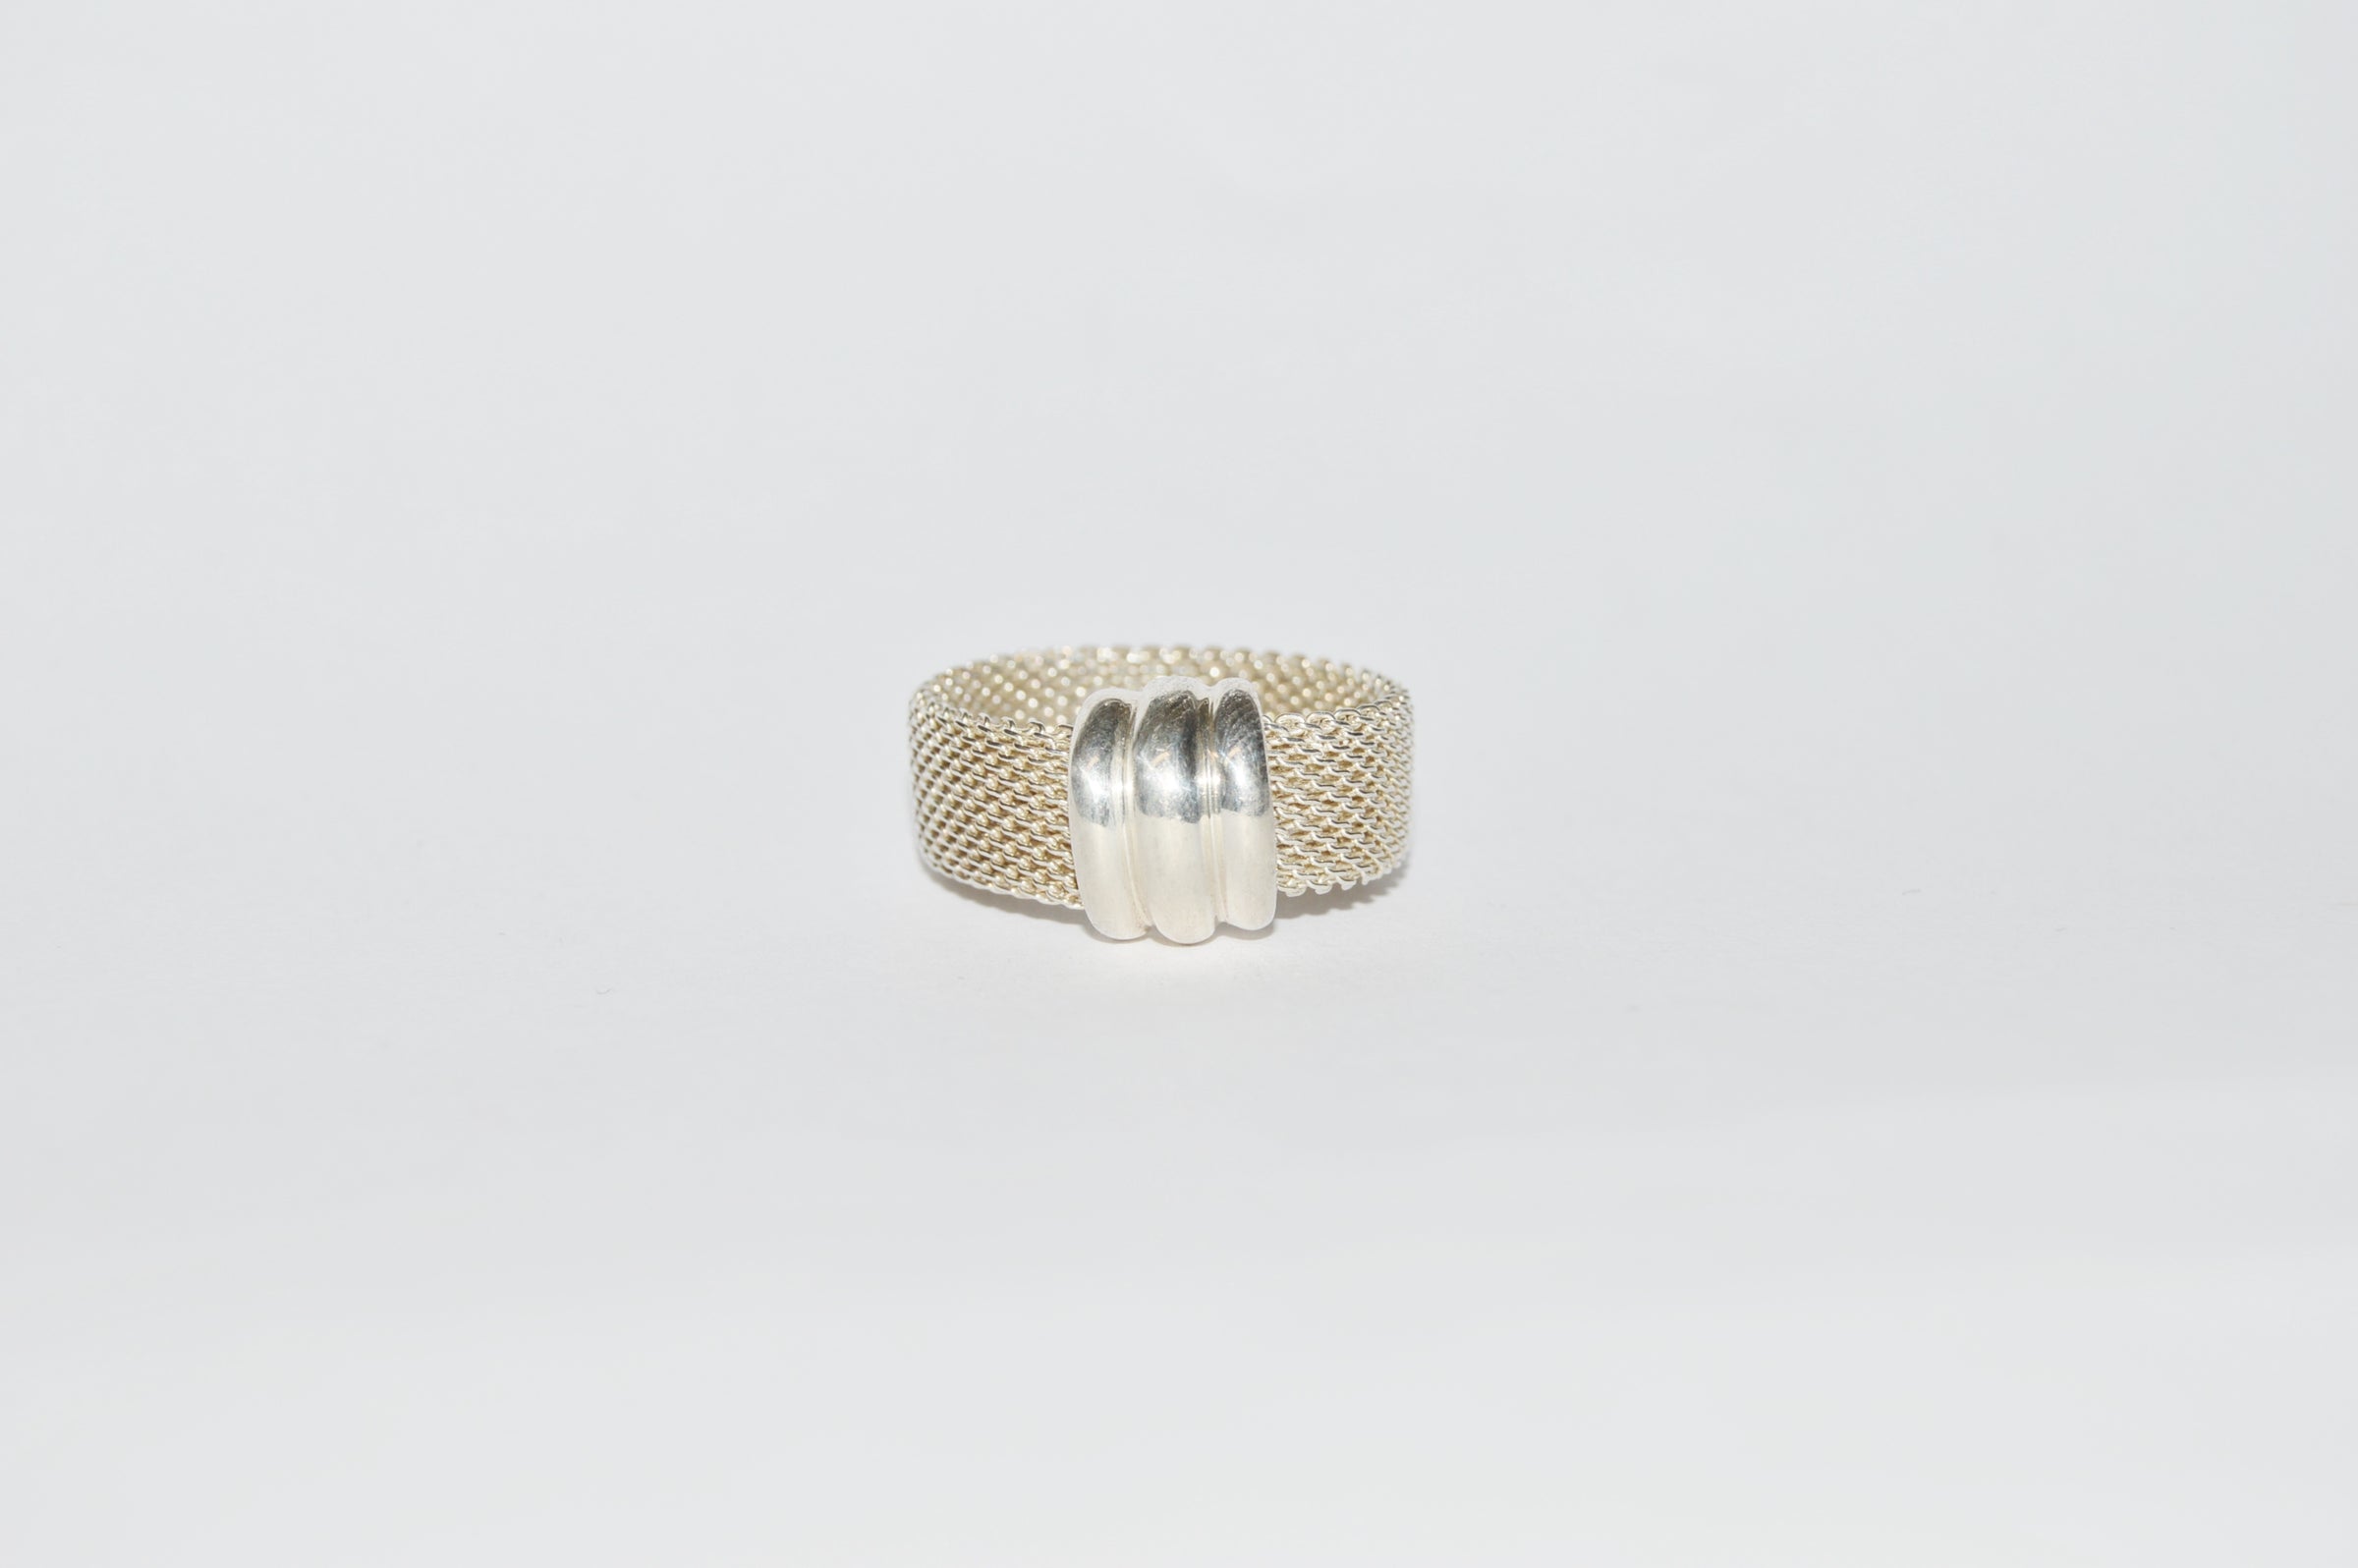 ESPO/SIG Sterling Silver .925 Mesh Band Ring www.hersandhistreasures.com/collections/sterling-silver-jewelry